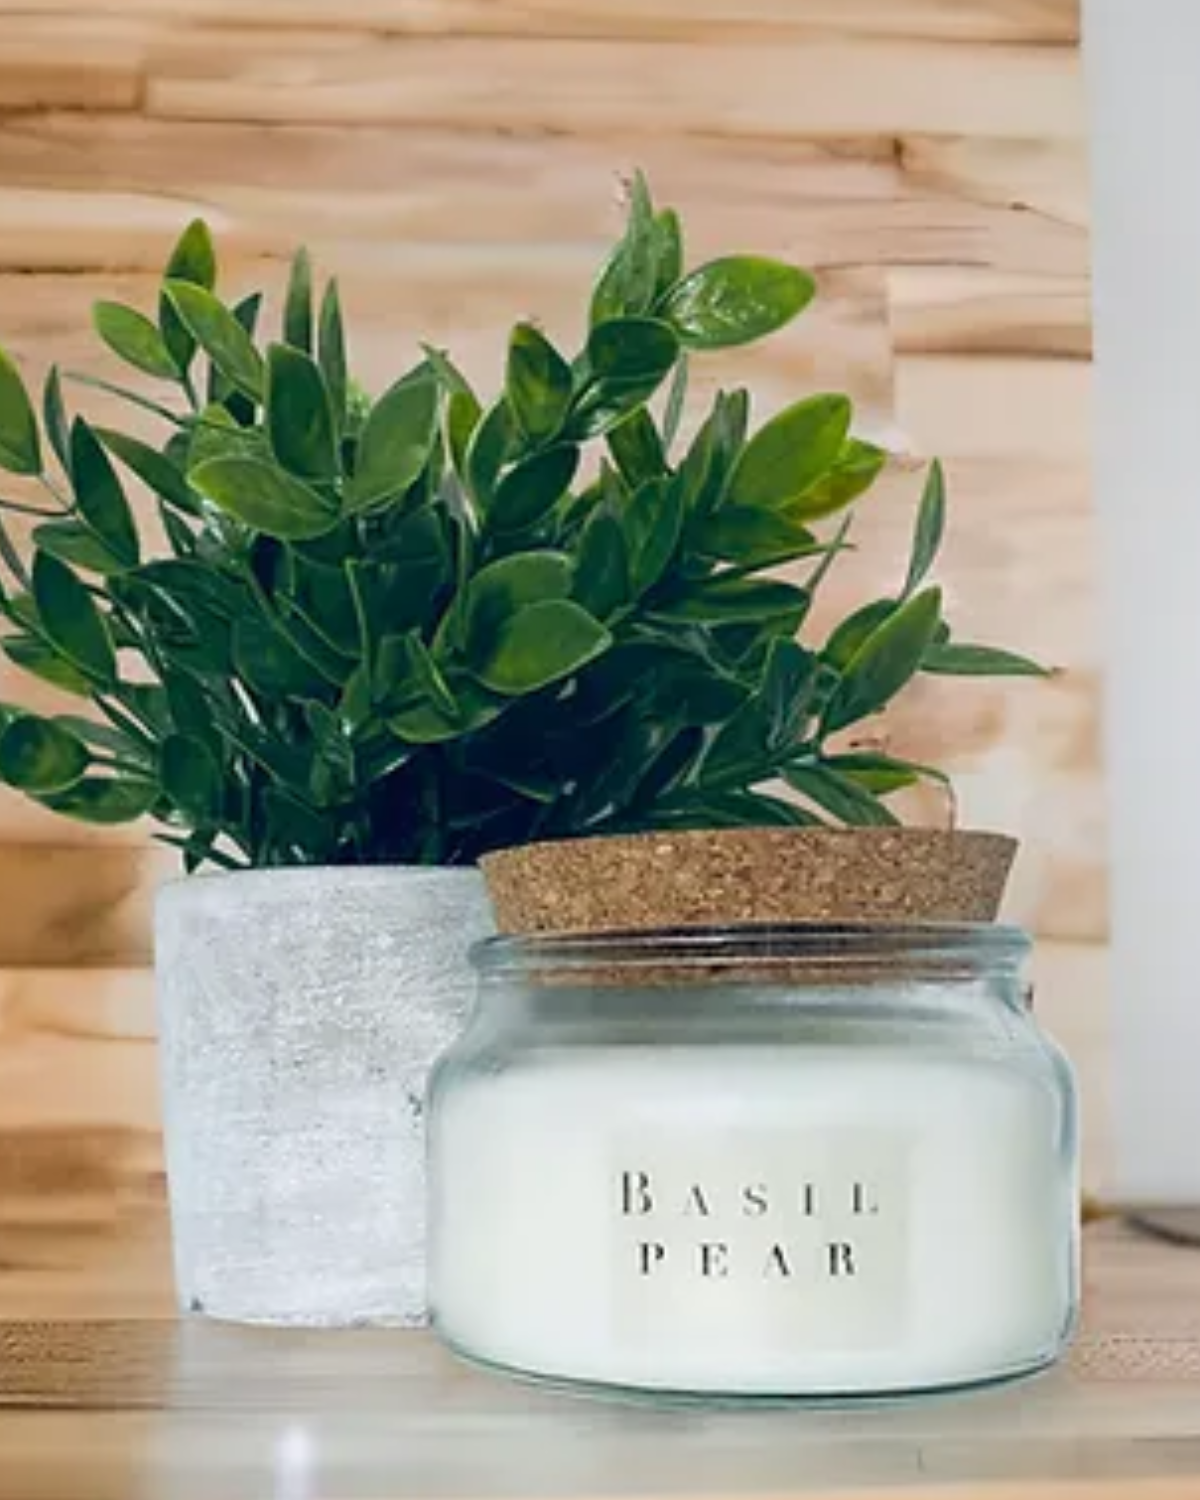 SLFLV and Co. Basil Pear Candle